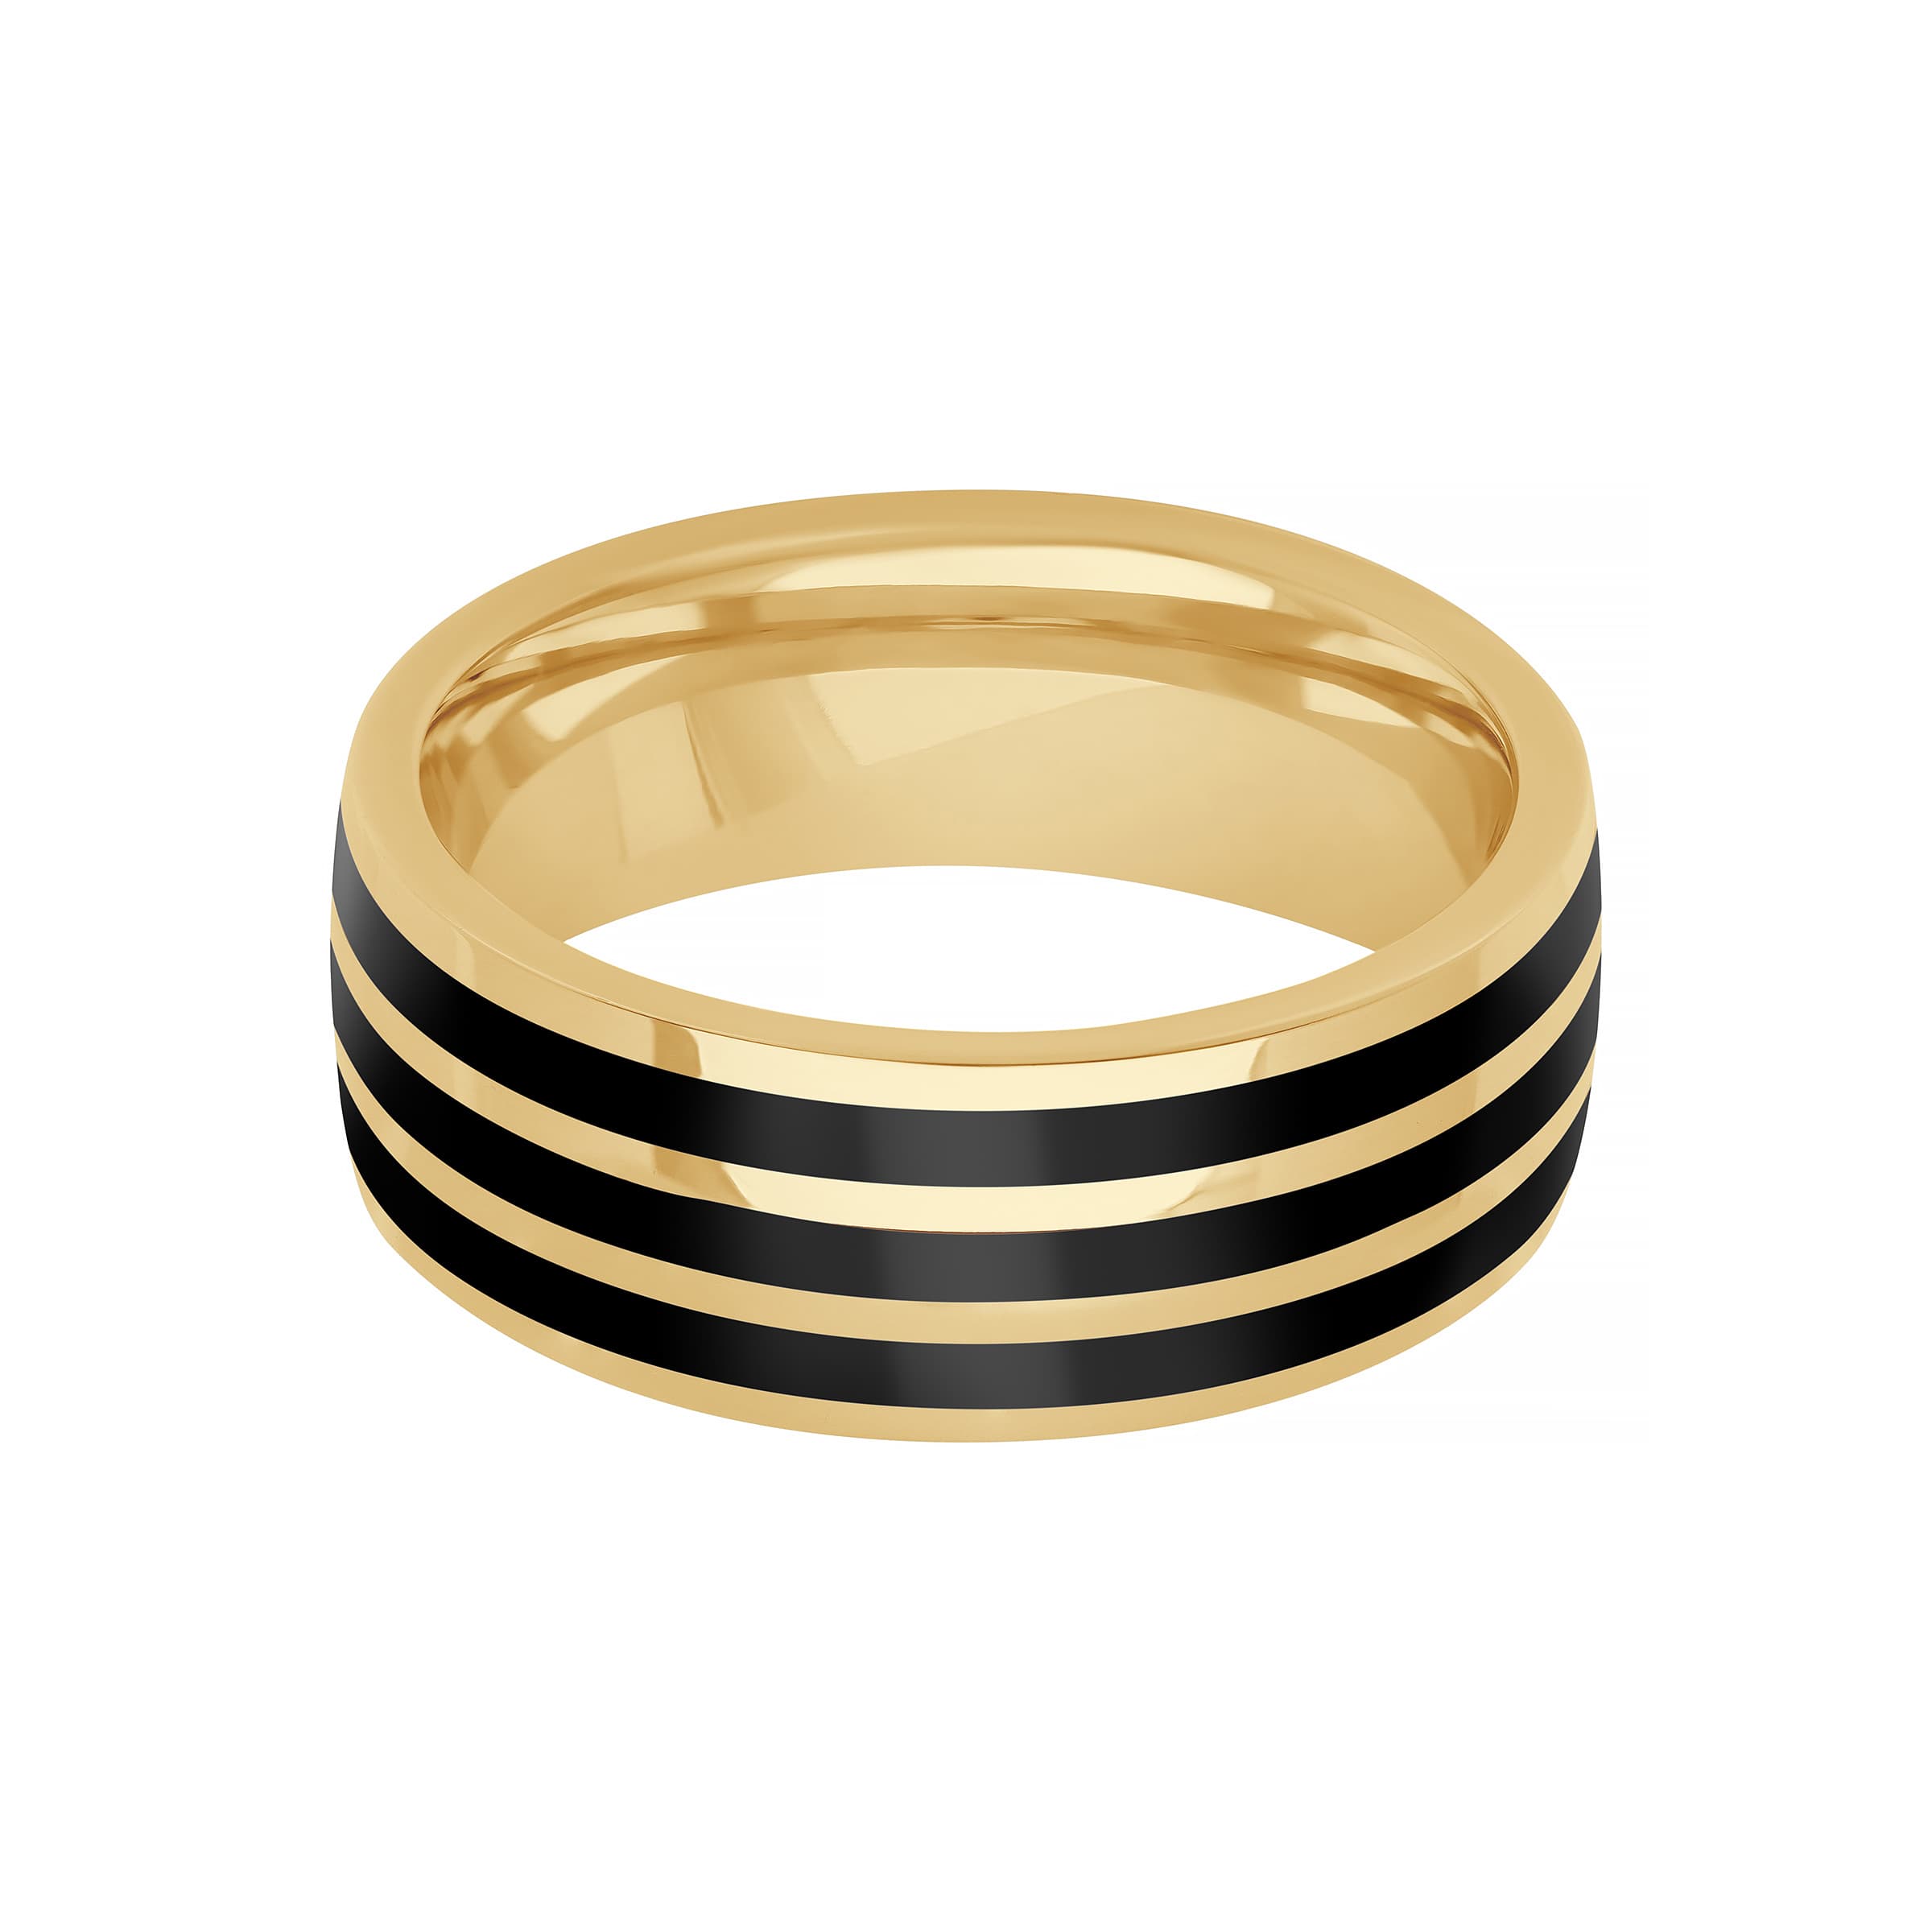 Gent's 14k Yellow Gold Band with Black Ceramic Stripes